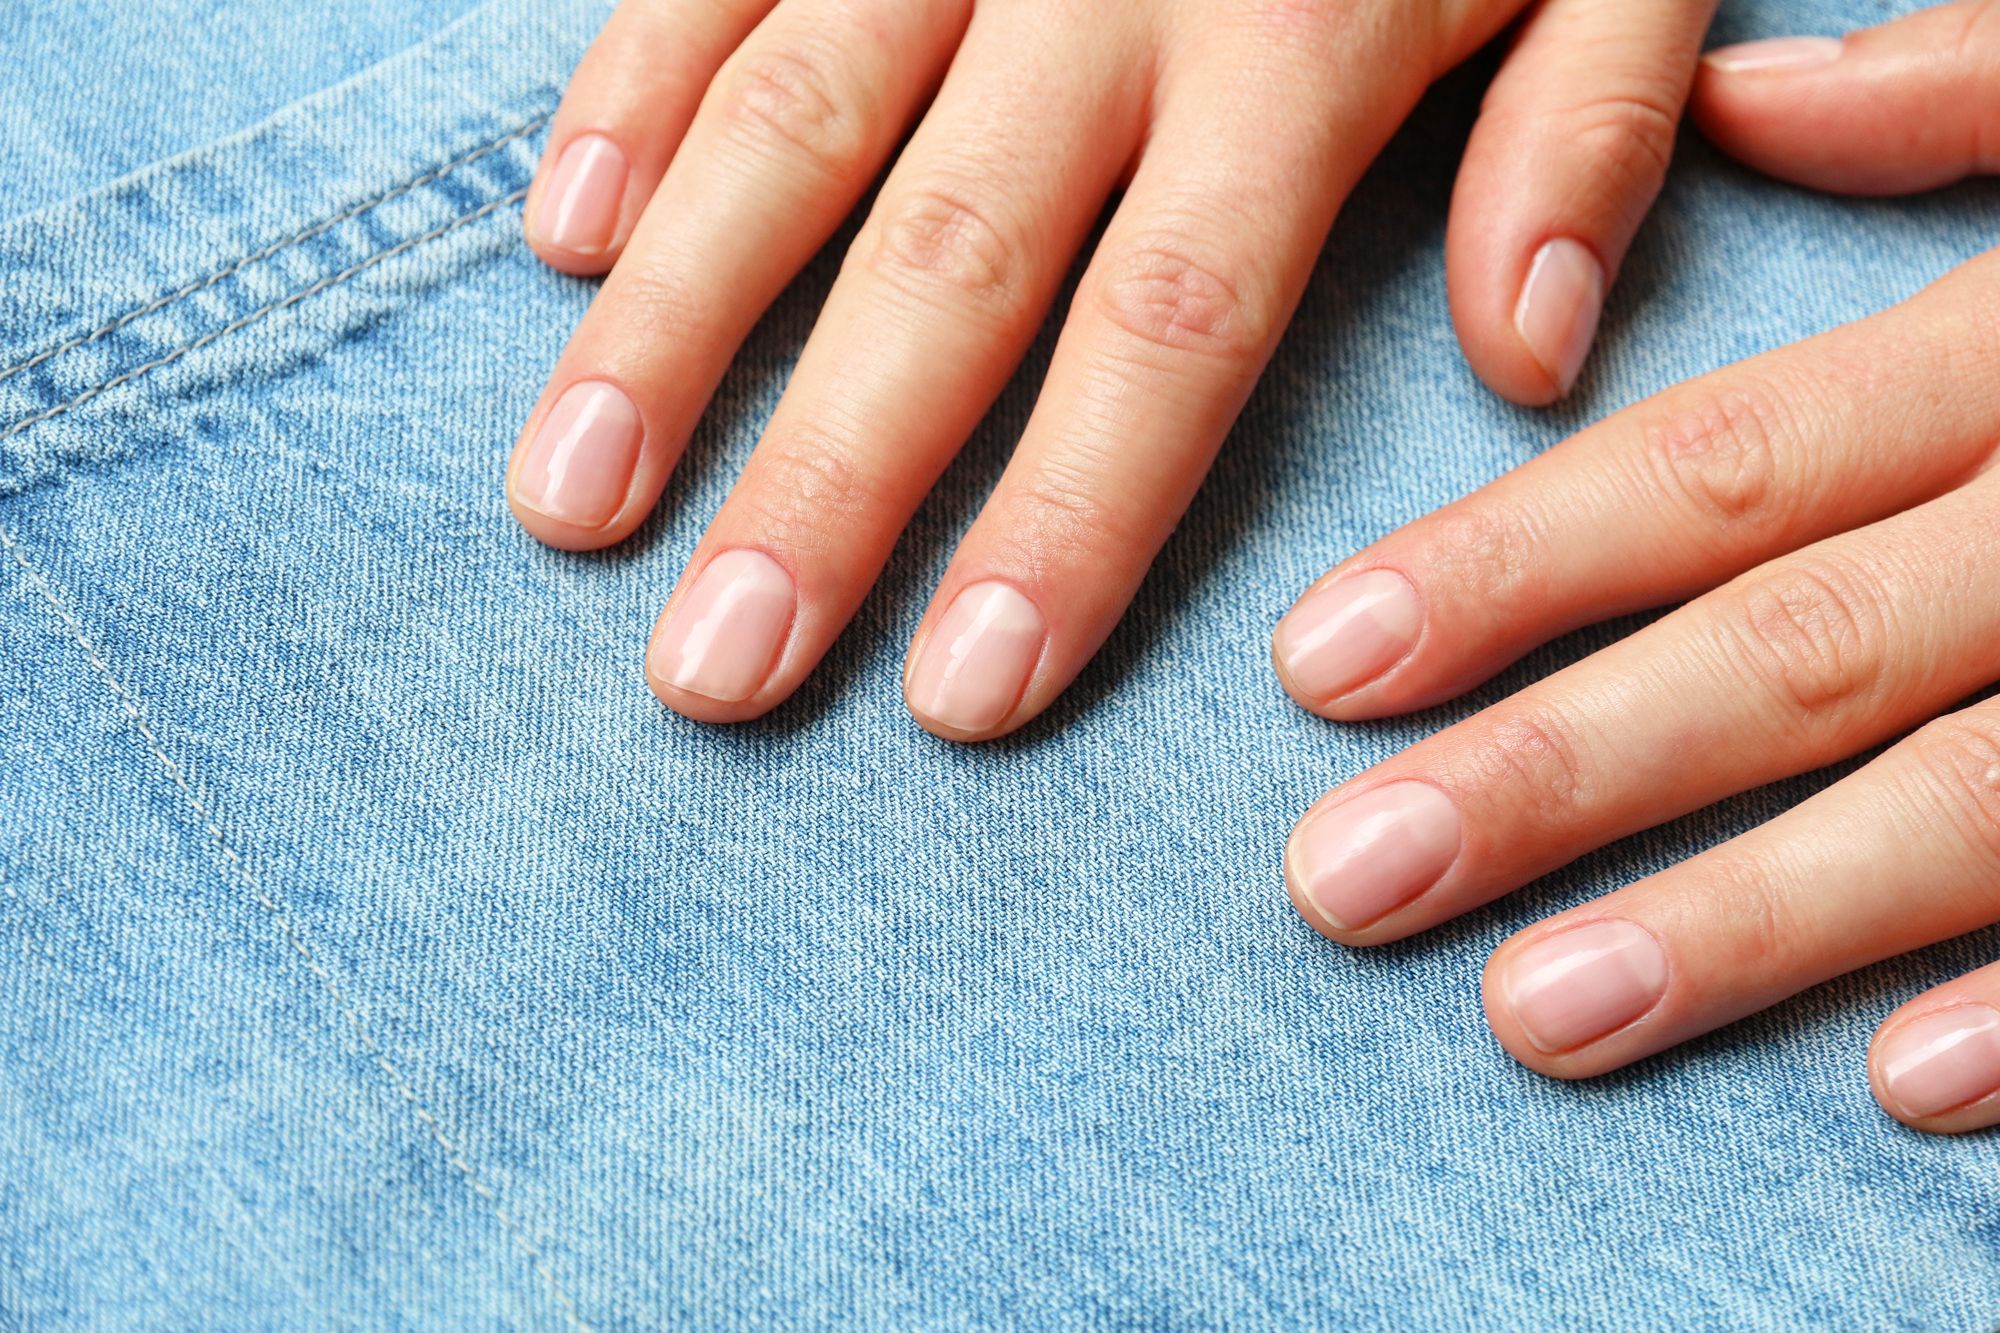 BIAB Is the Celeb Secret for Long Strong NailsHeres the 411